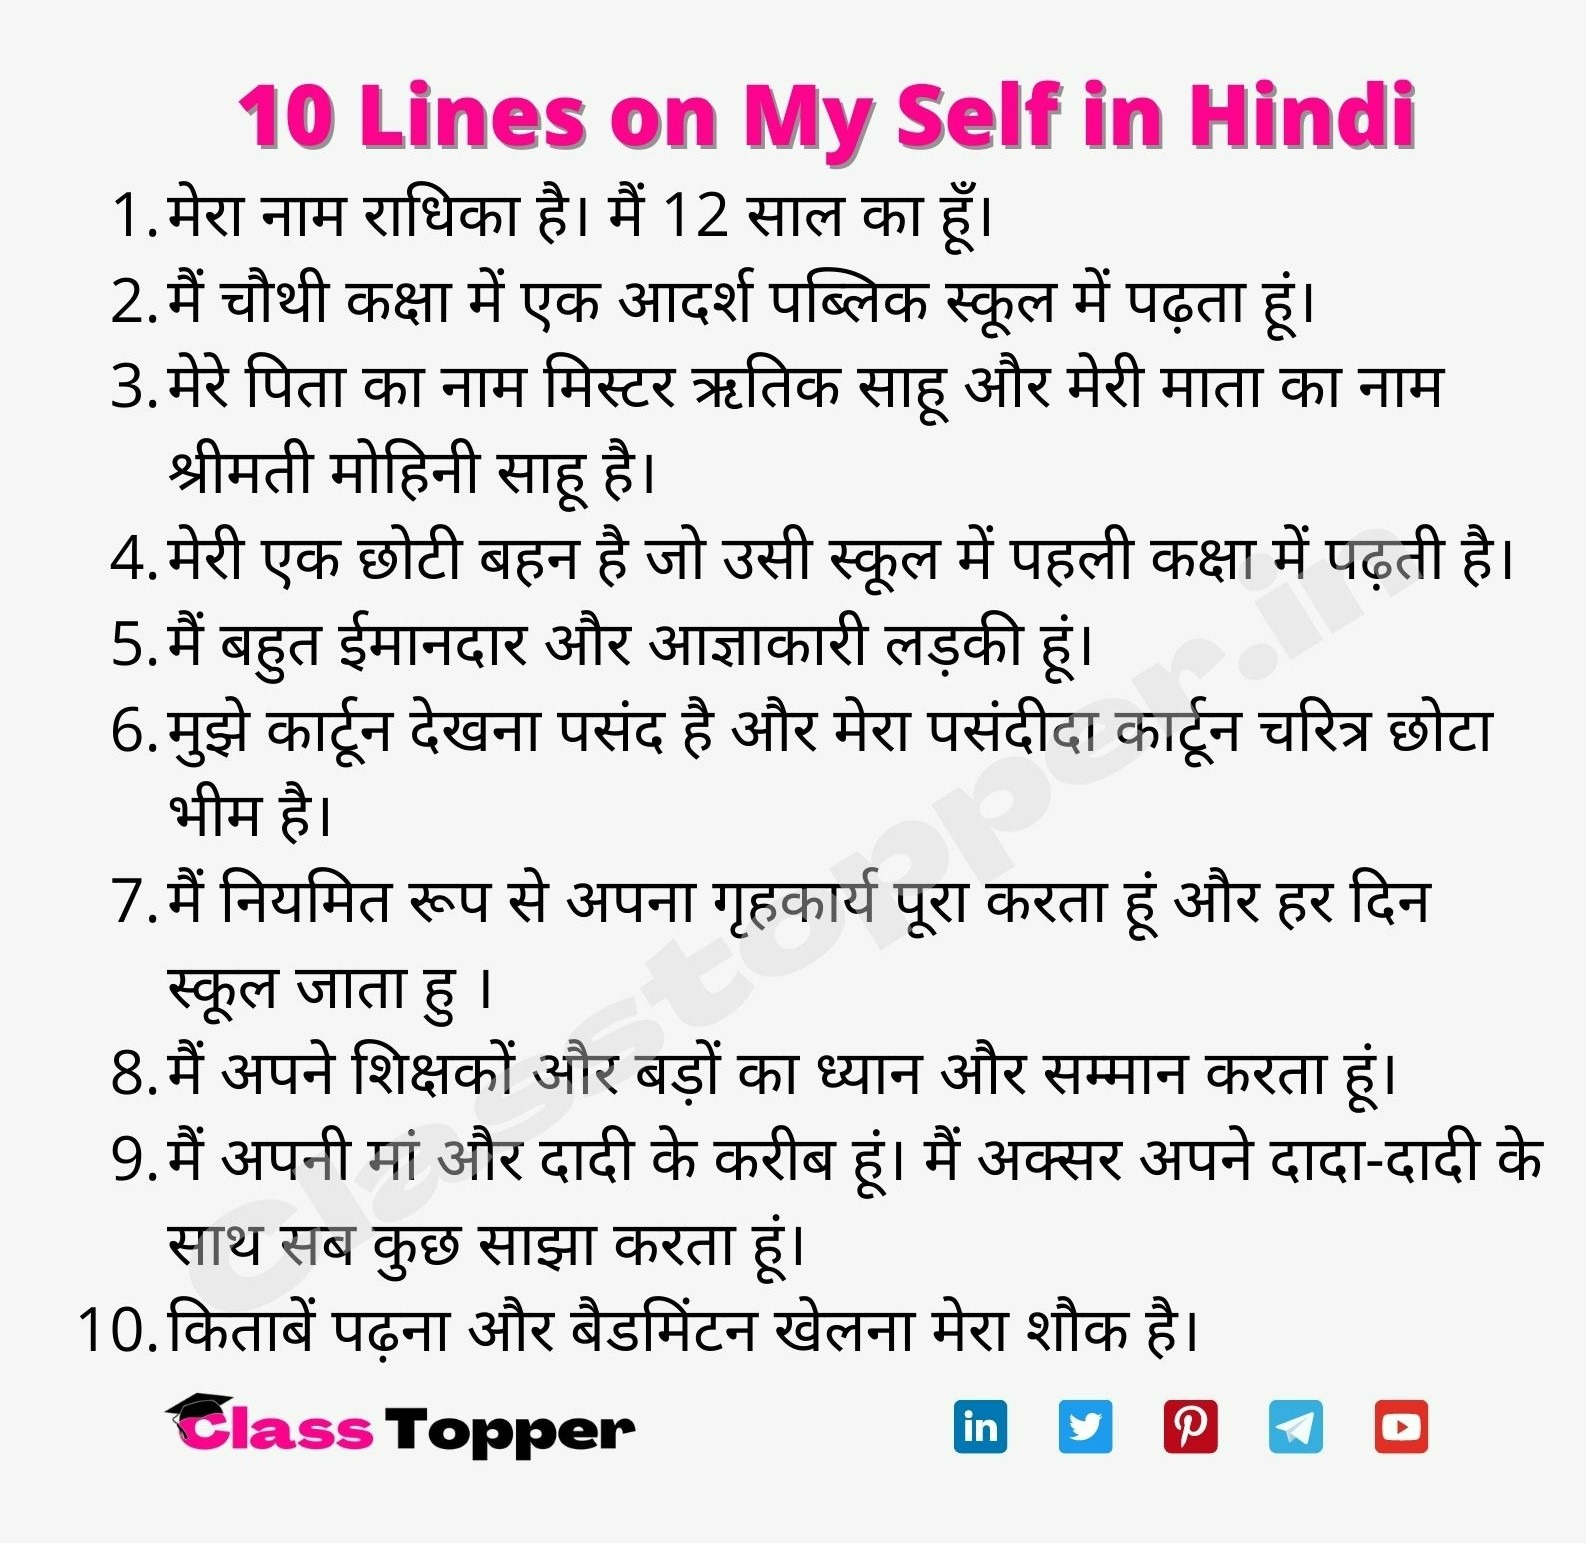 essay about myself in hindi